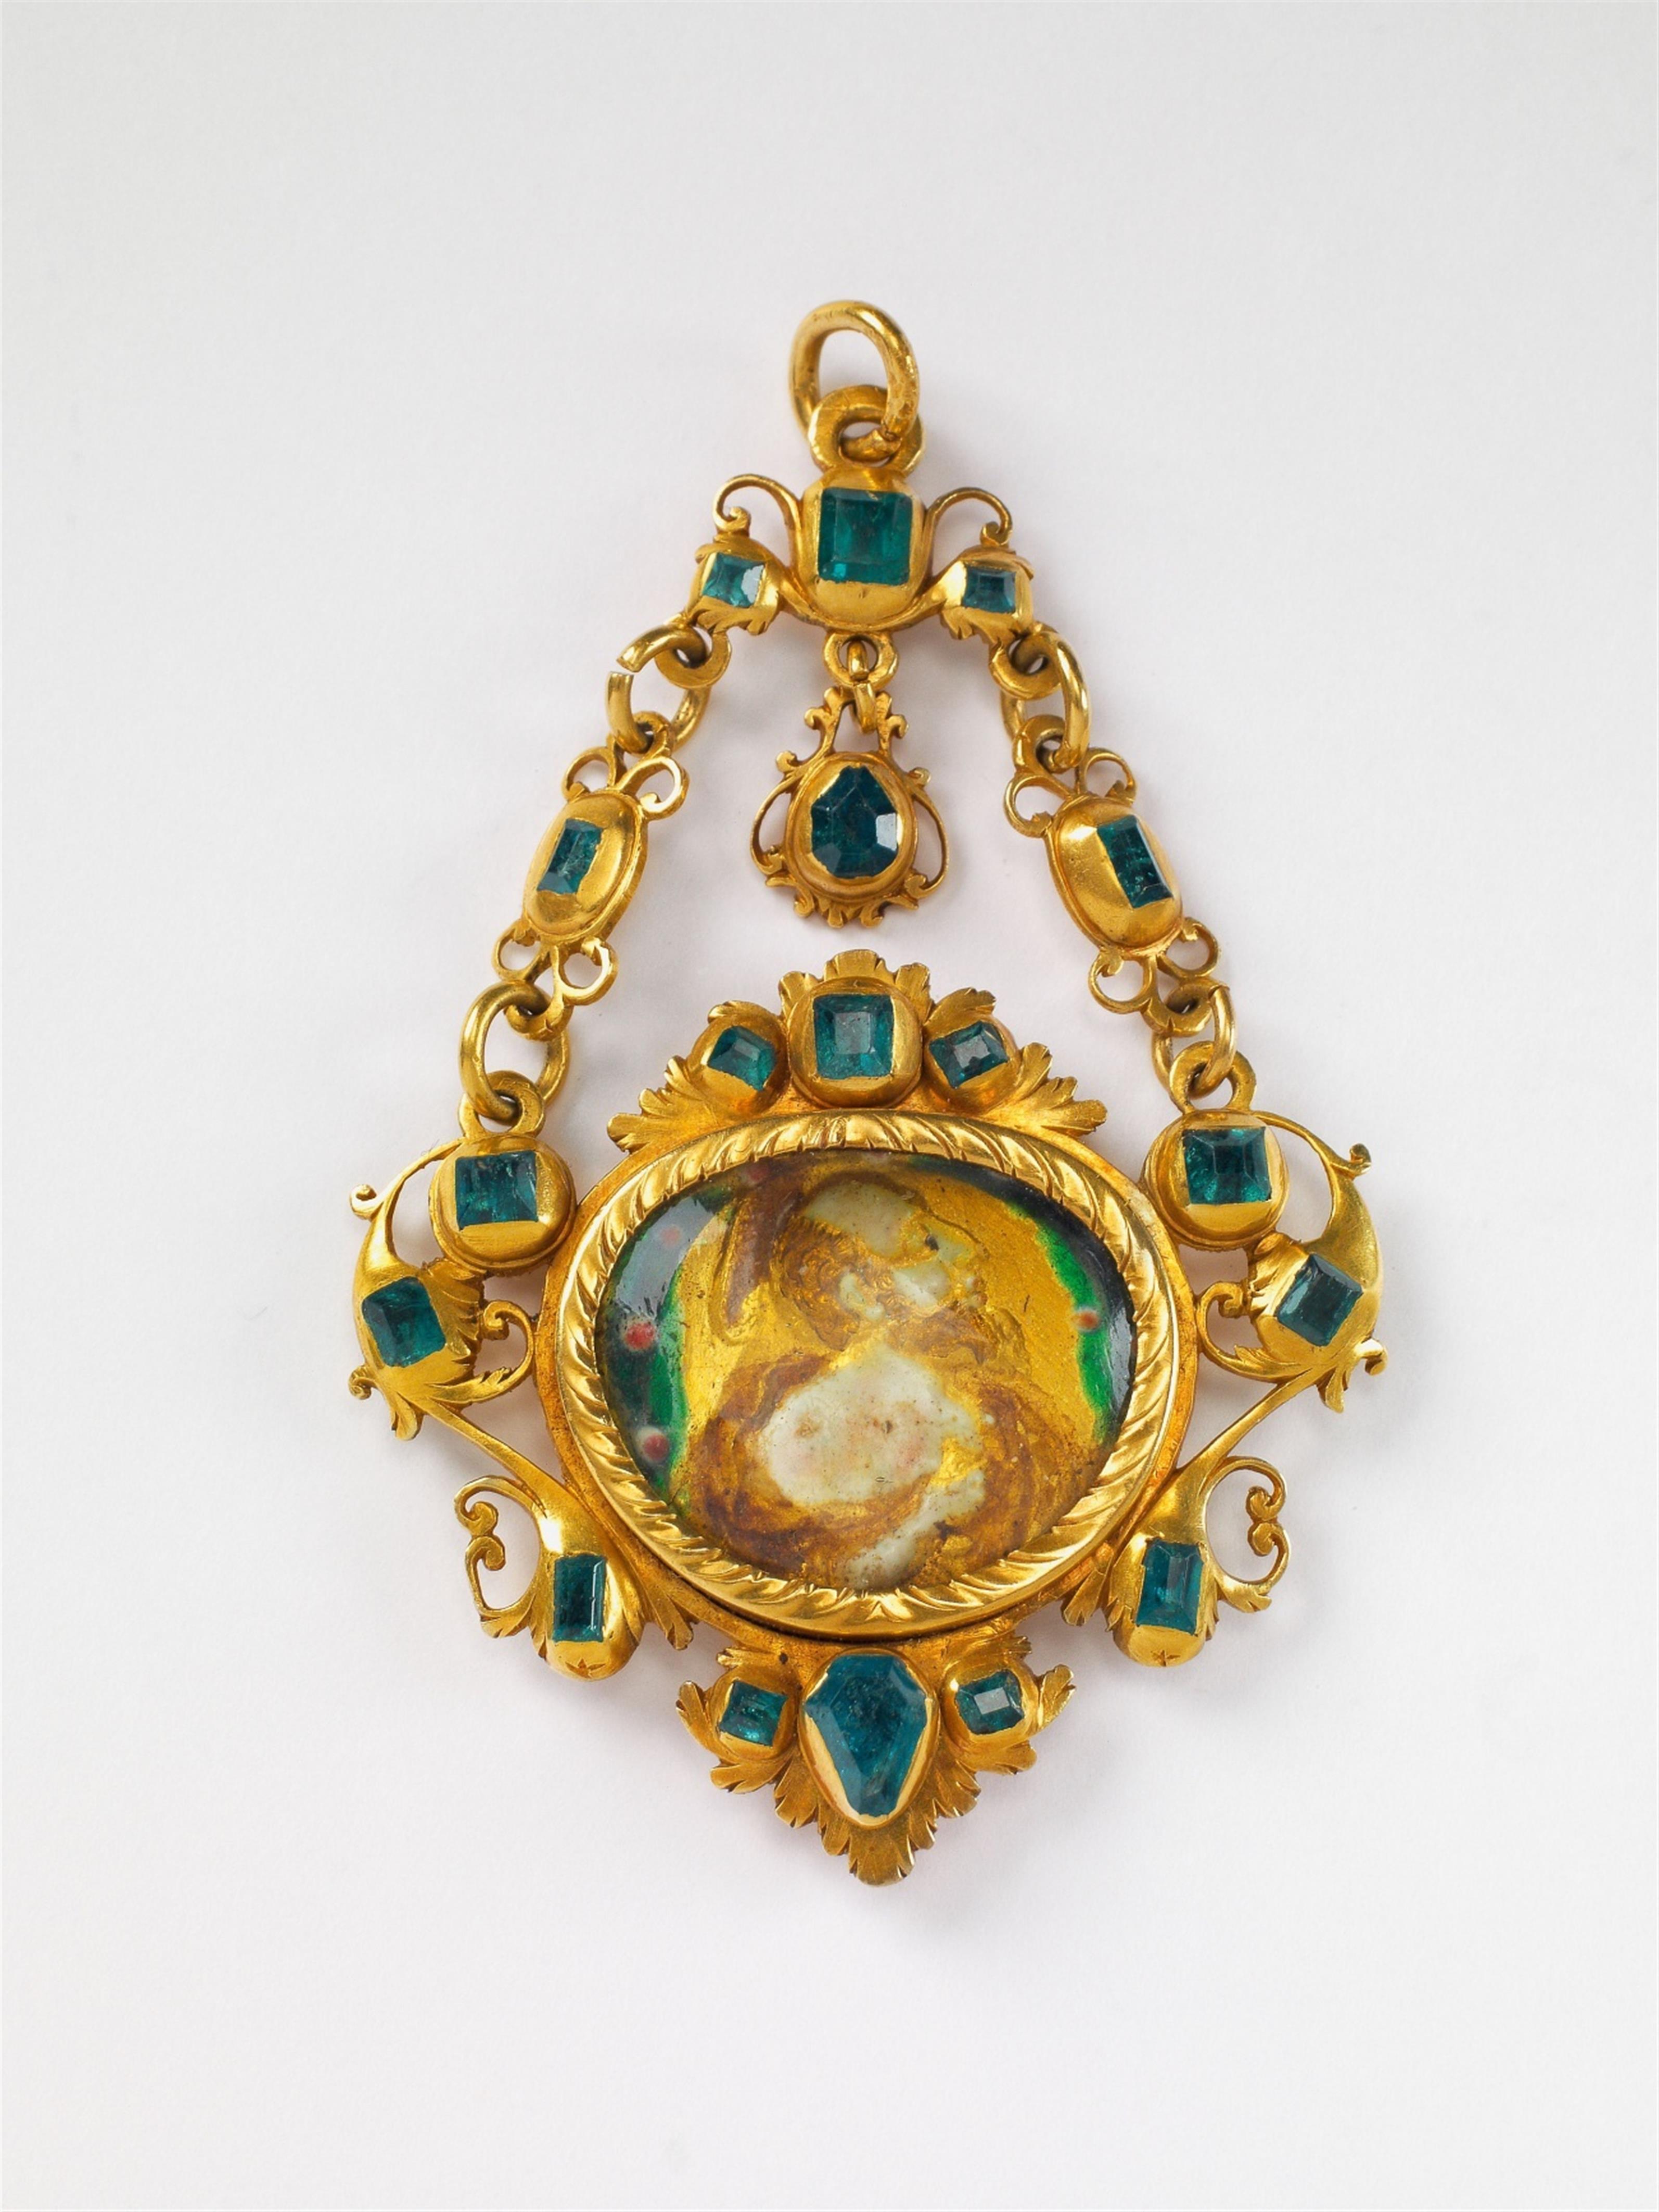 An 18k gold, enamel and emerald religious pendant - image-1